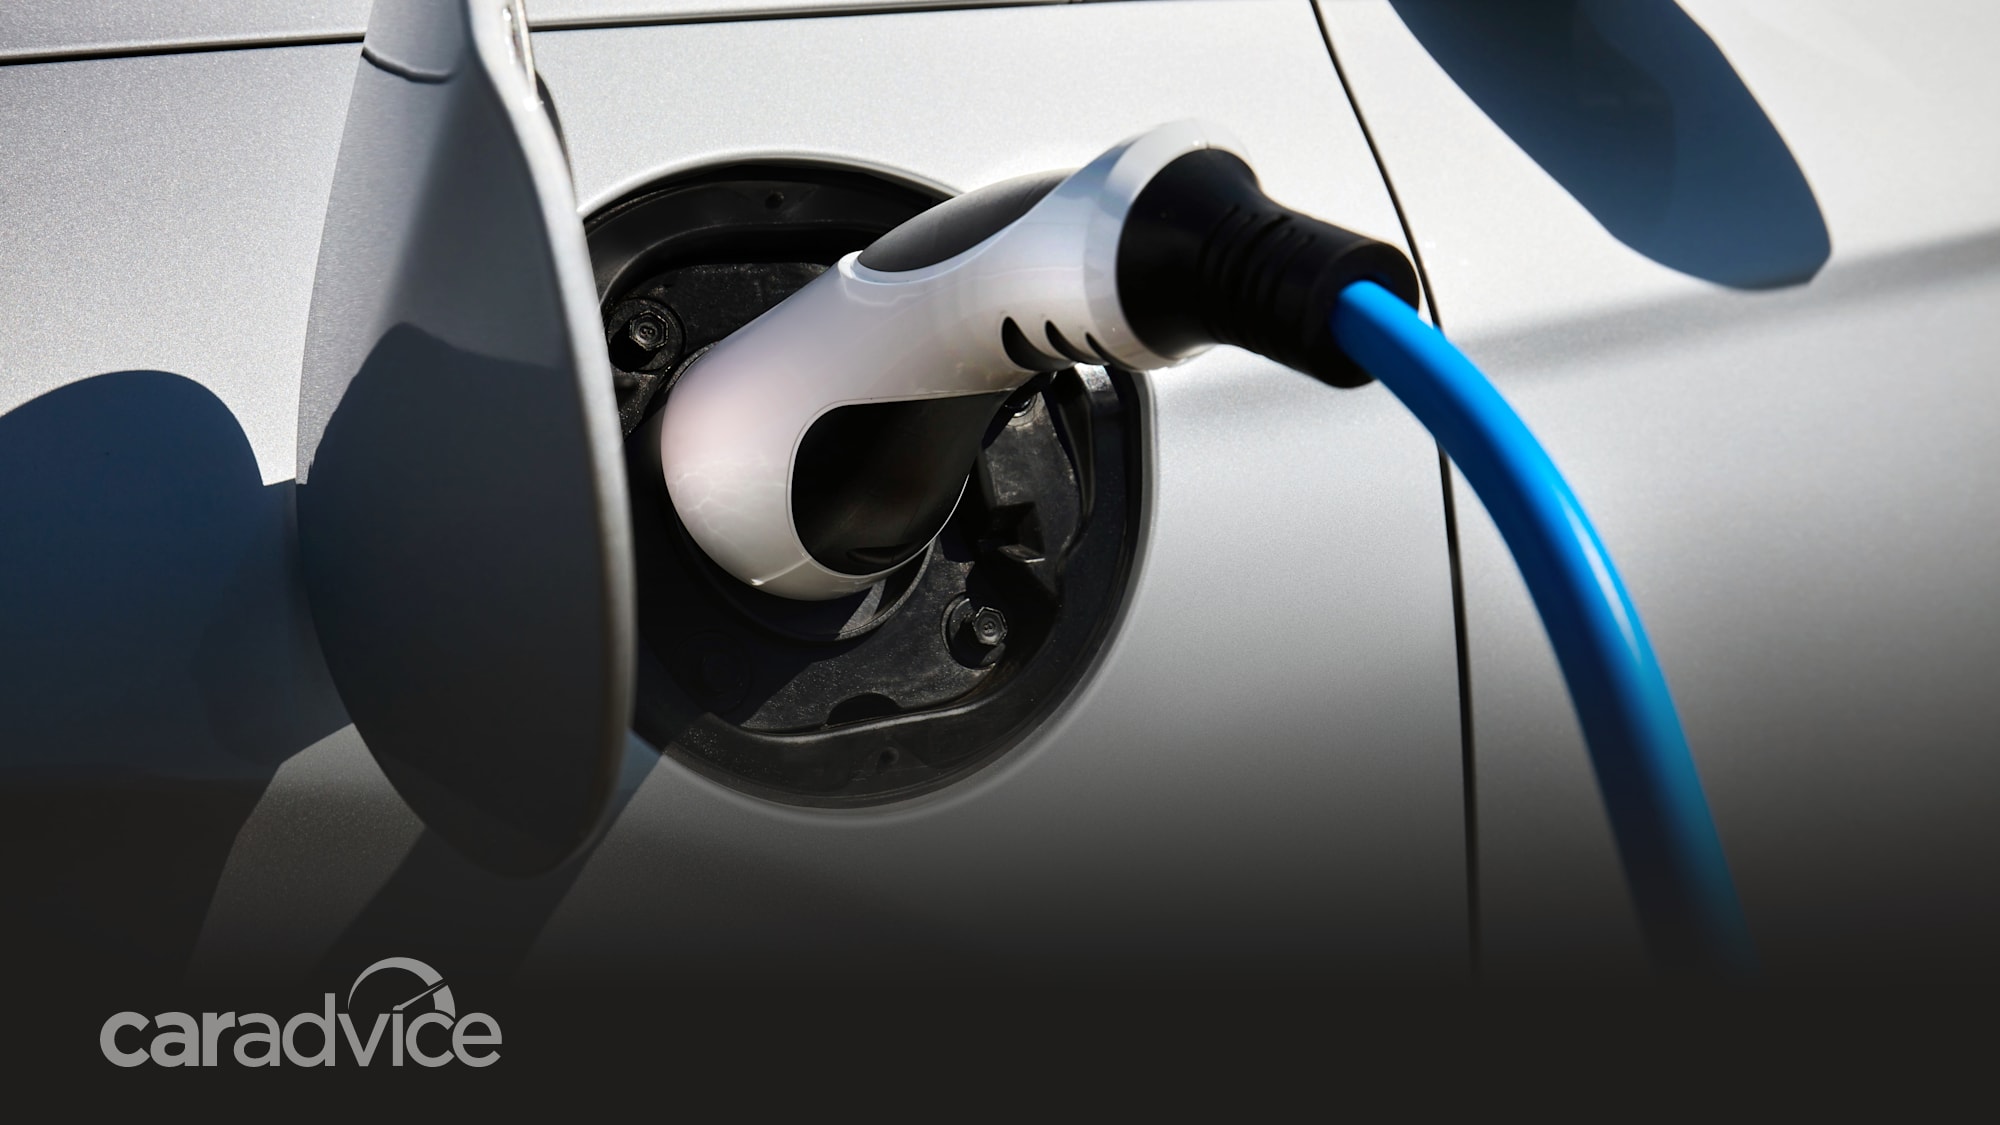 How long does it take to charge an electric vehicle? How does an EV